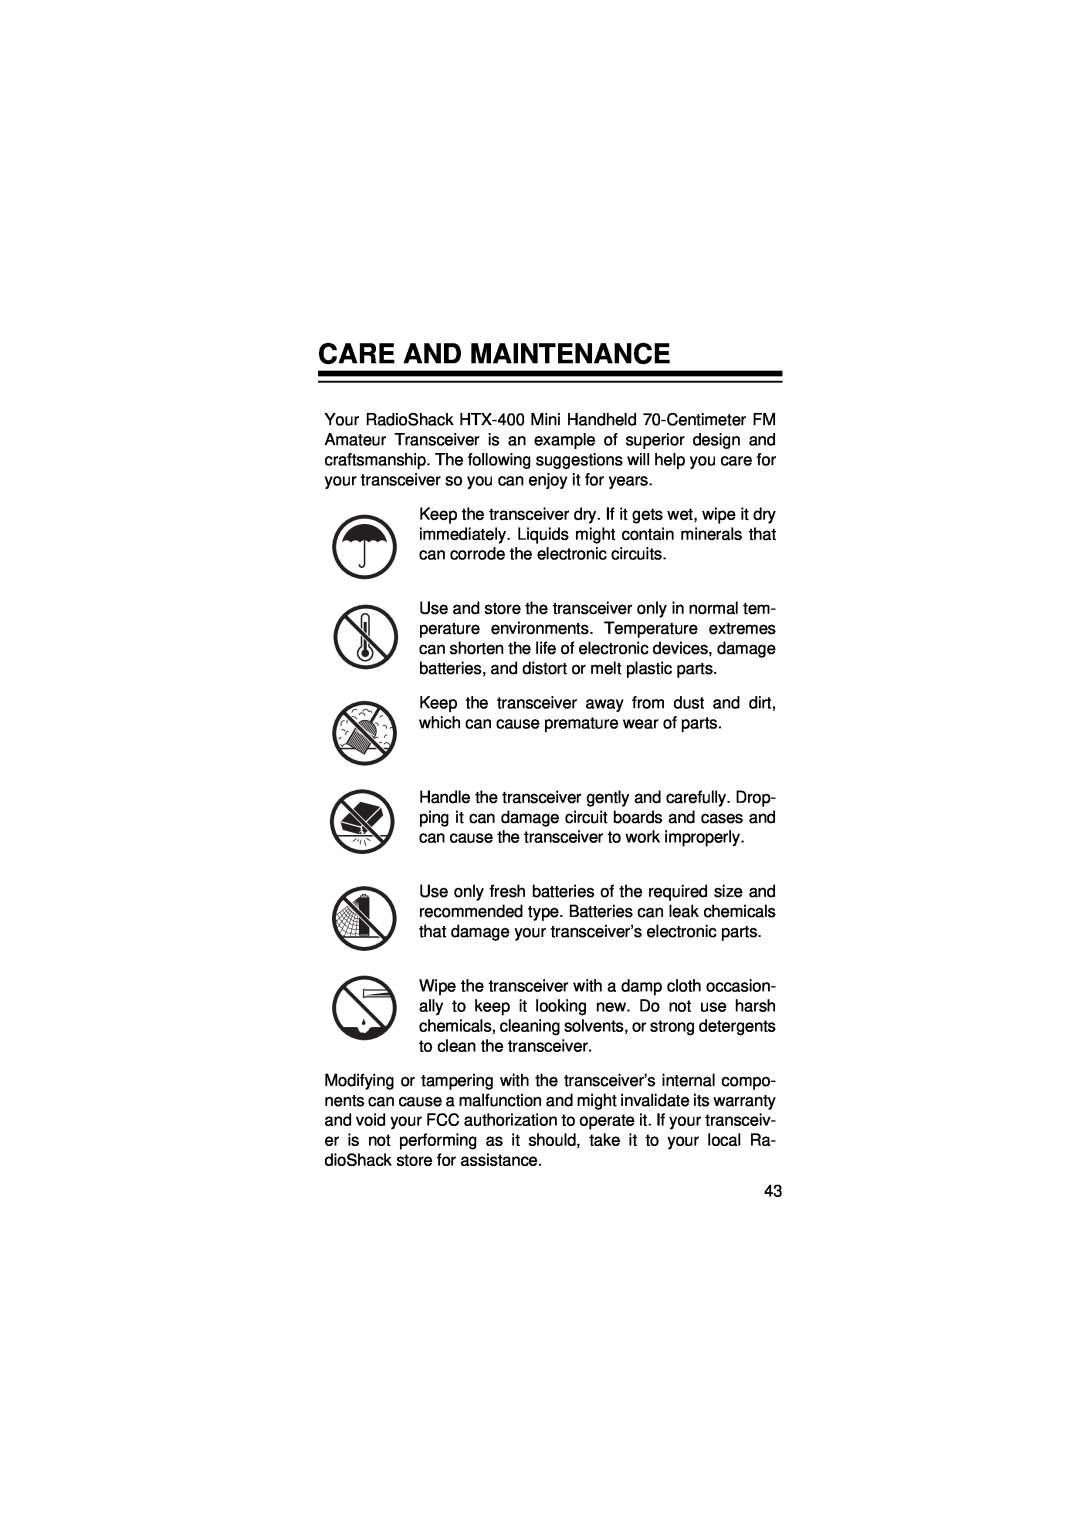 Radio Shack HTX-400 owner manual Care And Maintenance 